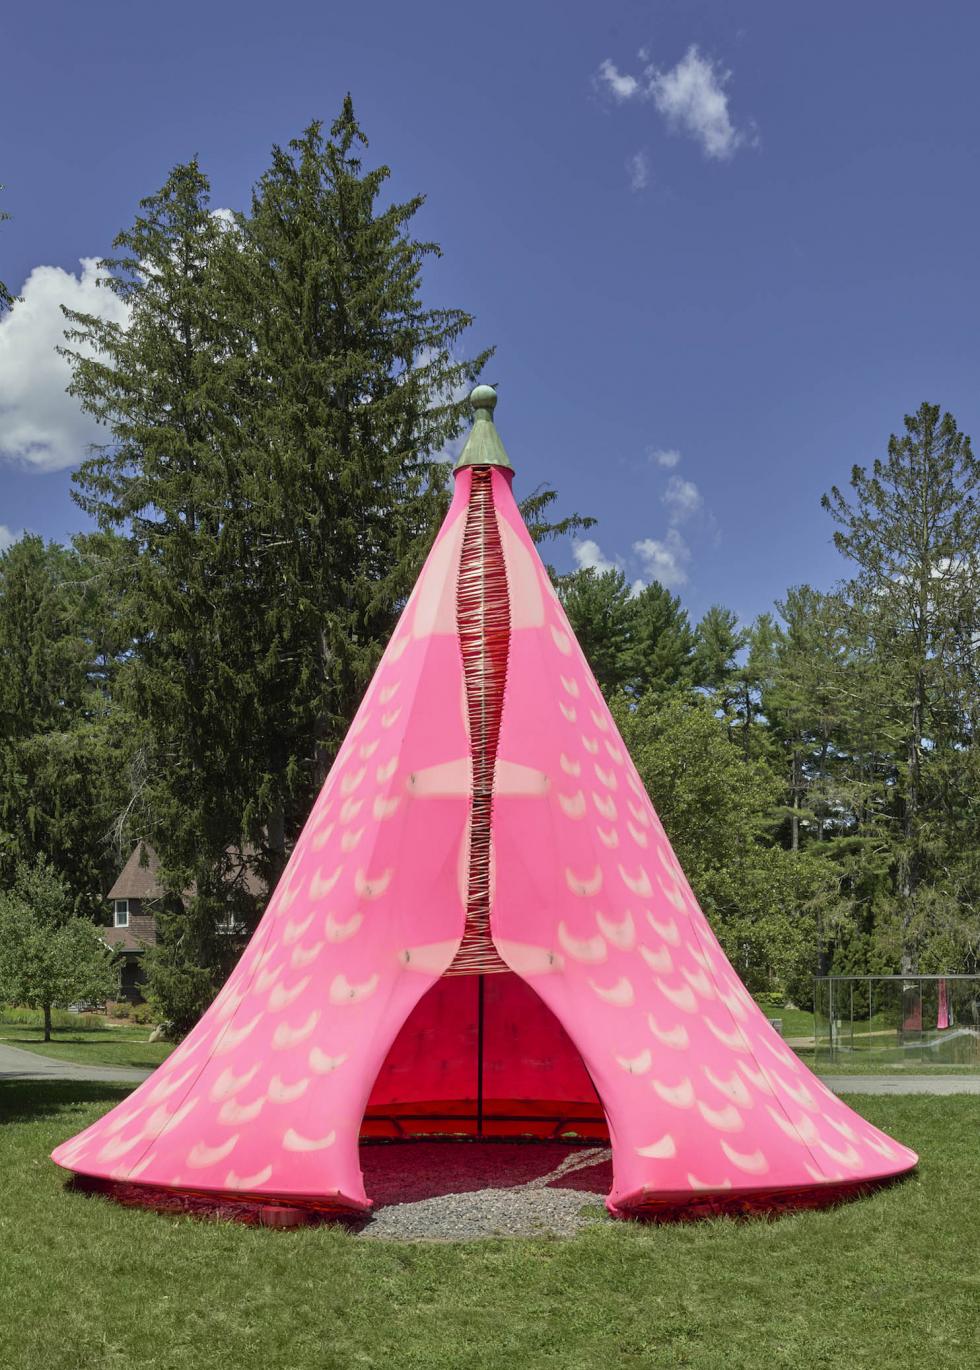 Cone-shaped pink tent with light yellow designs, trees and a blue sky in the background.